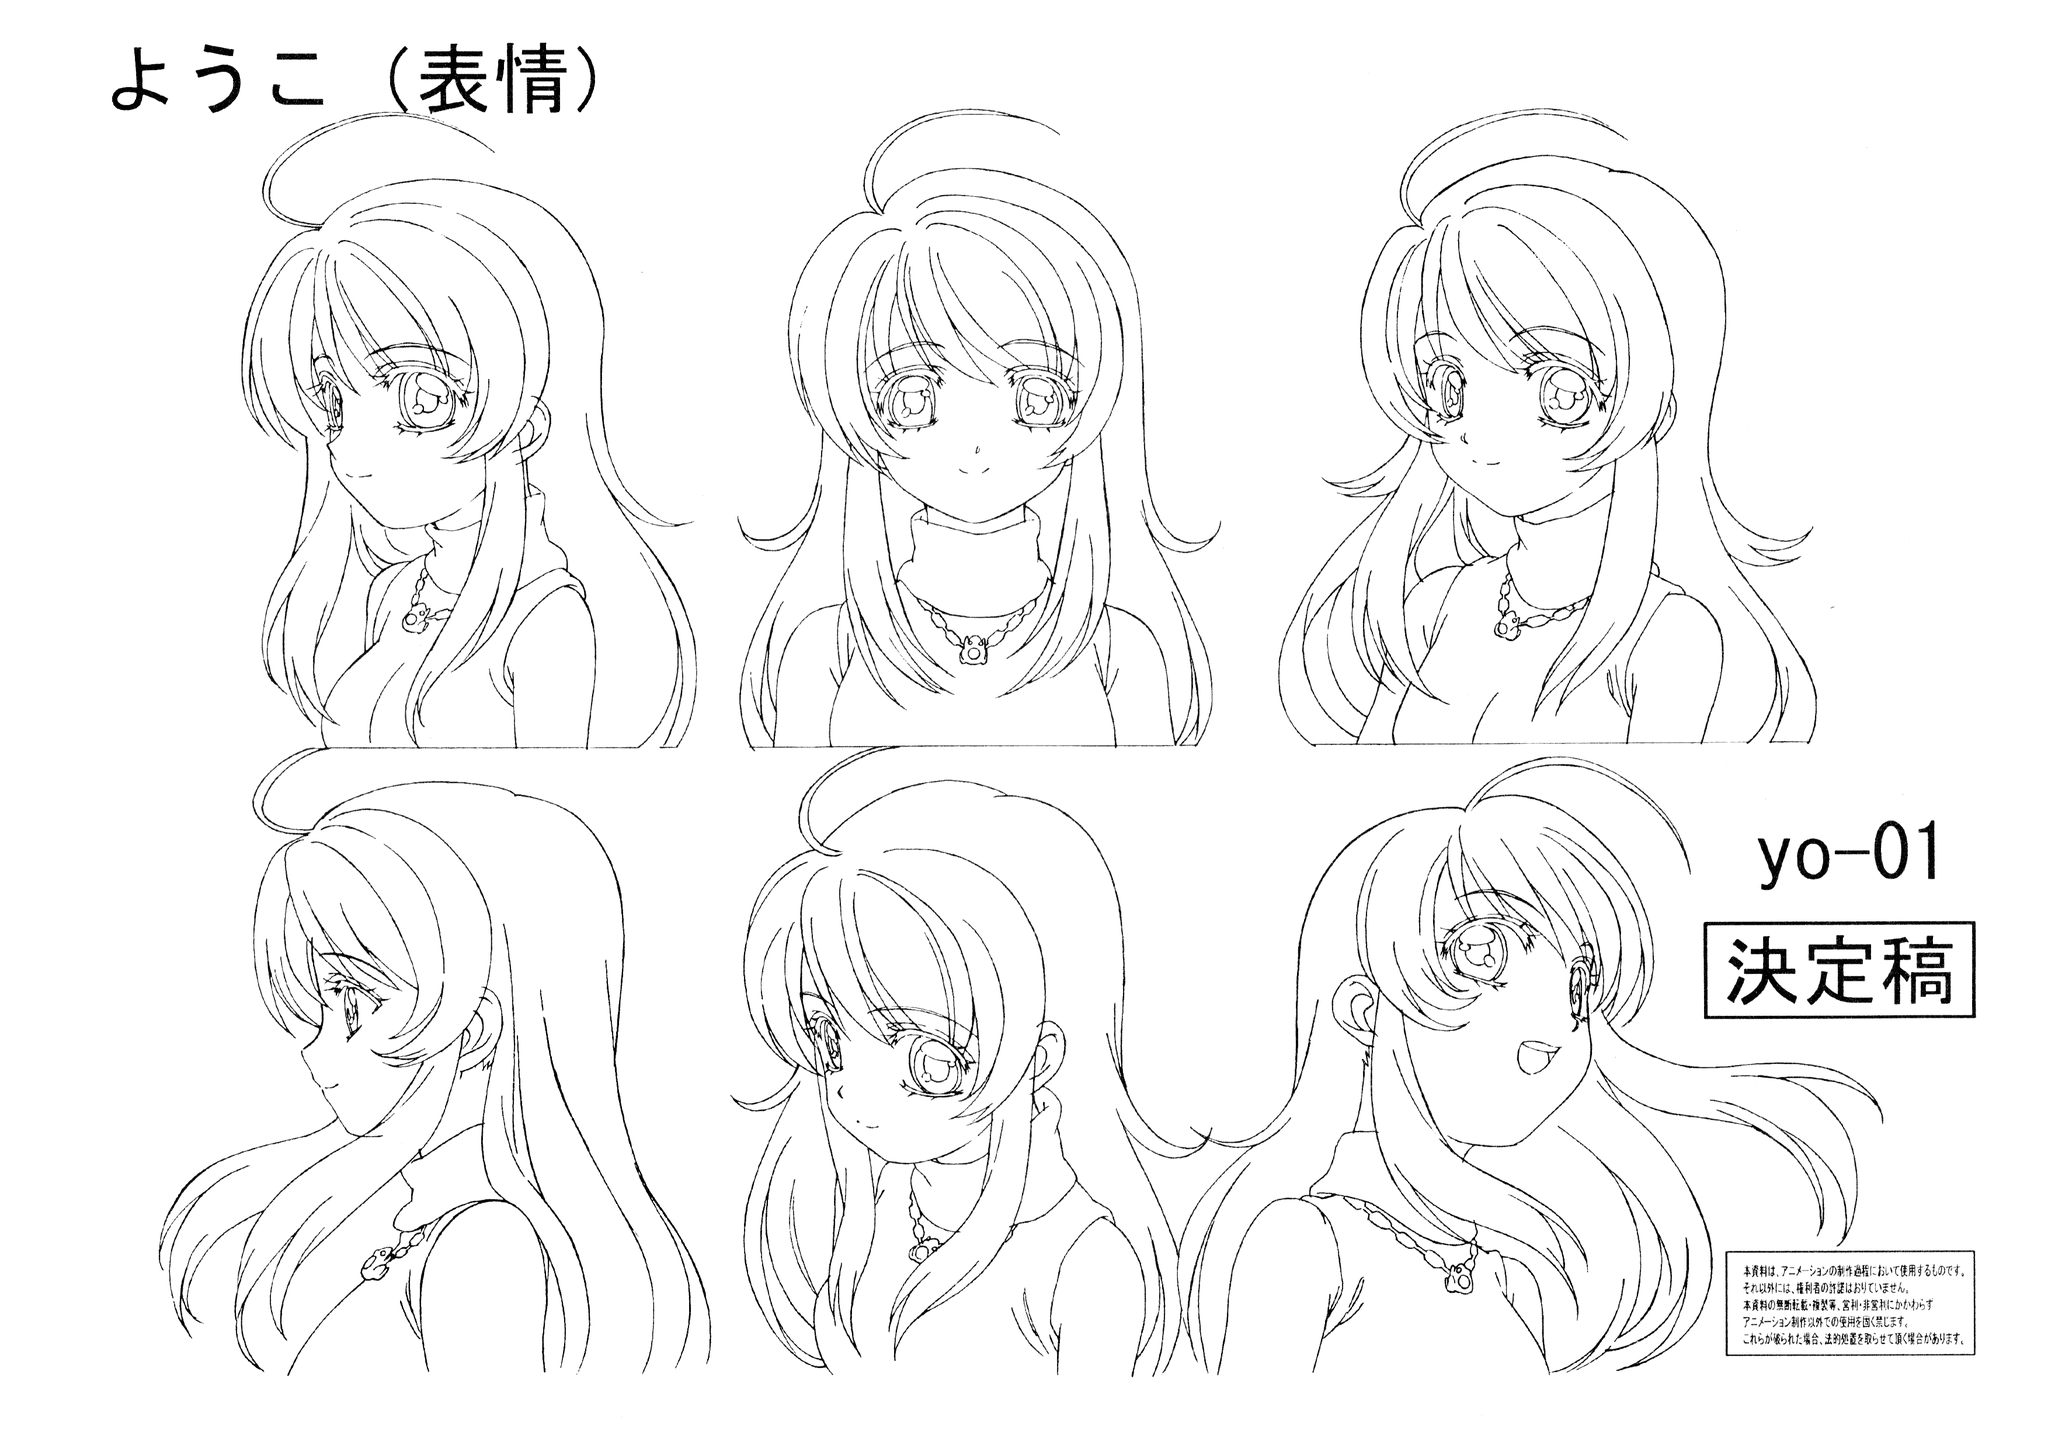 Settei Dreams on X: Futoku no Guild (34 sheets) is now available in the  WIP ( section. #FutokuNoGuild #ImmoralGuild #anime  #animation #settei #modelsheets #conceptart #characterdesign  #charactersheet #ecchi